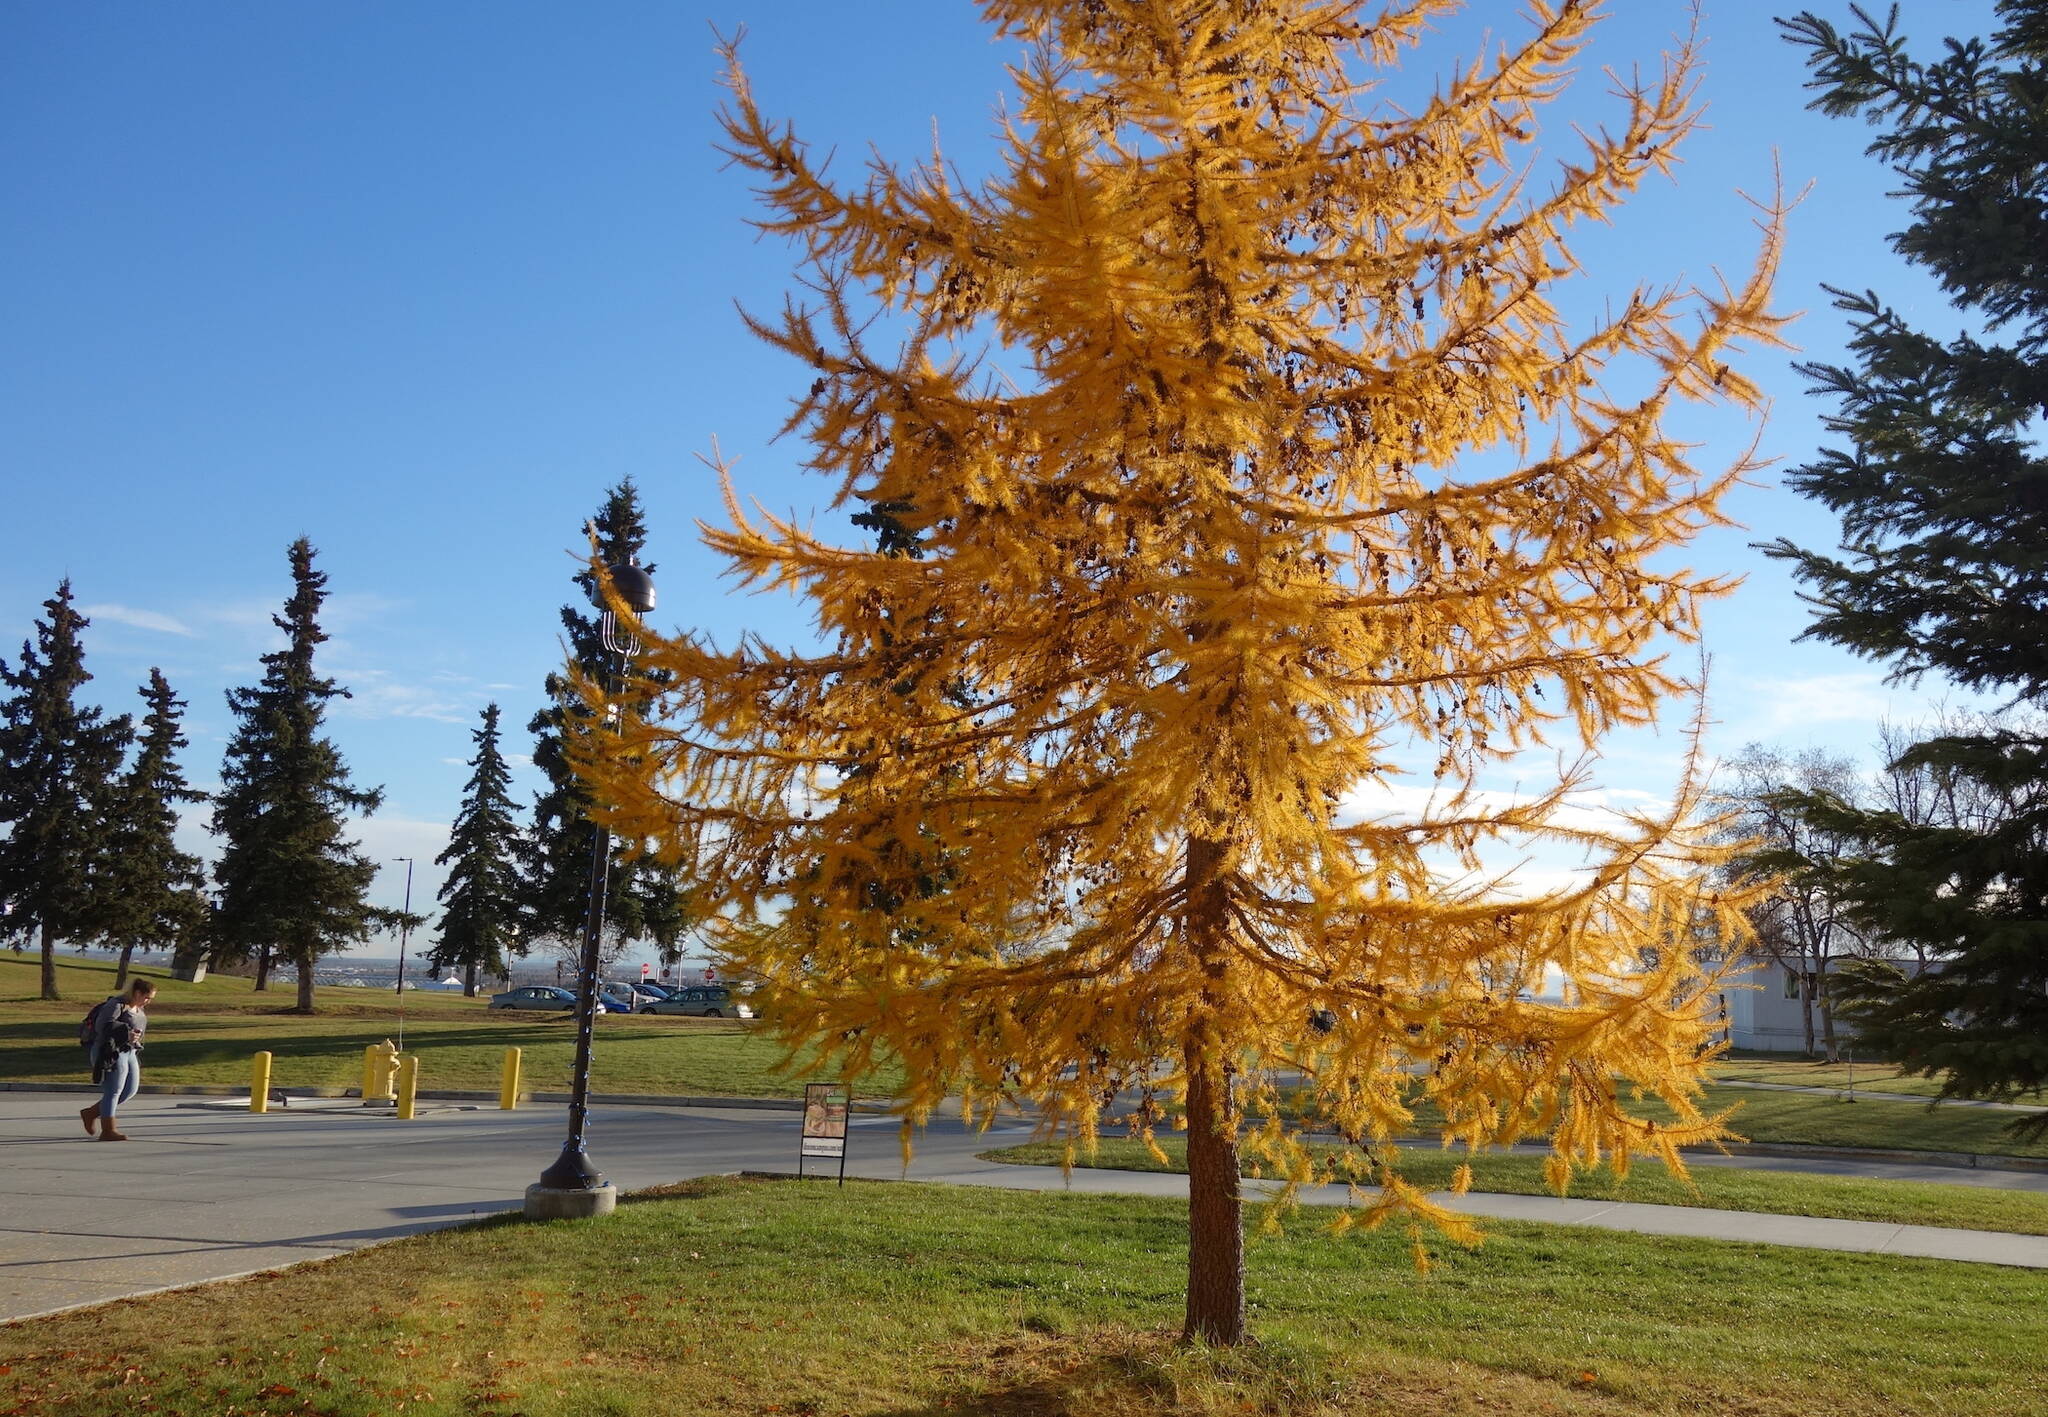 A Siberian larch on the University of Alaska Fairbanks campus beams on Oct. 18, 2018, long after most other deciduous trees have dropped their leaves. (Photo by Ned Rozell)